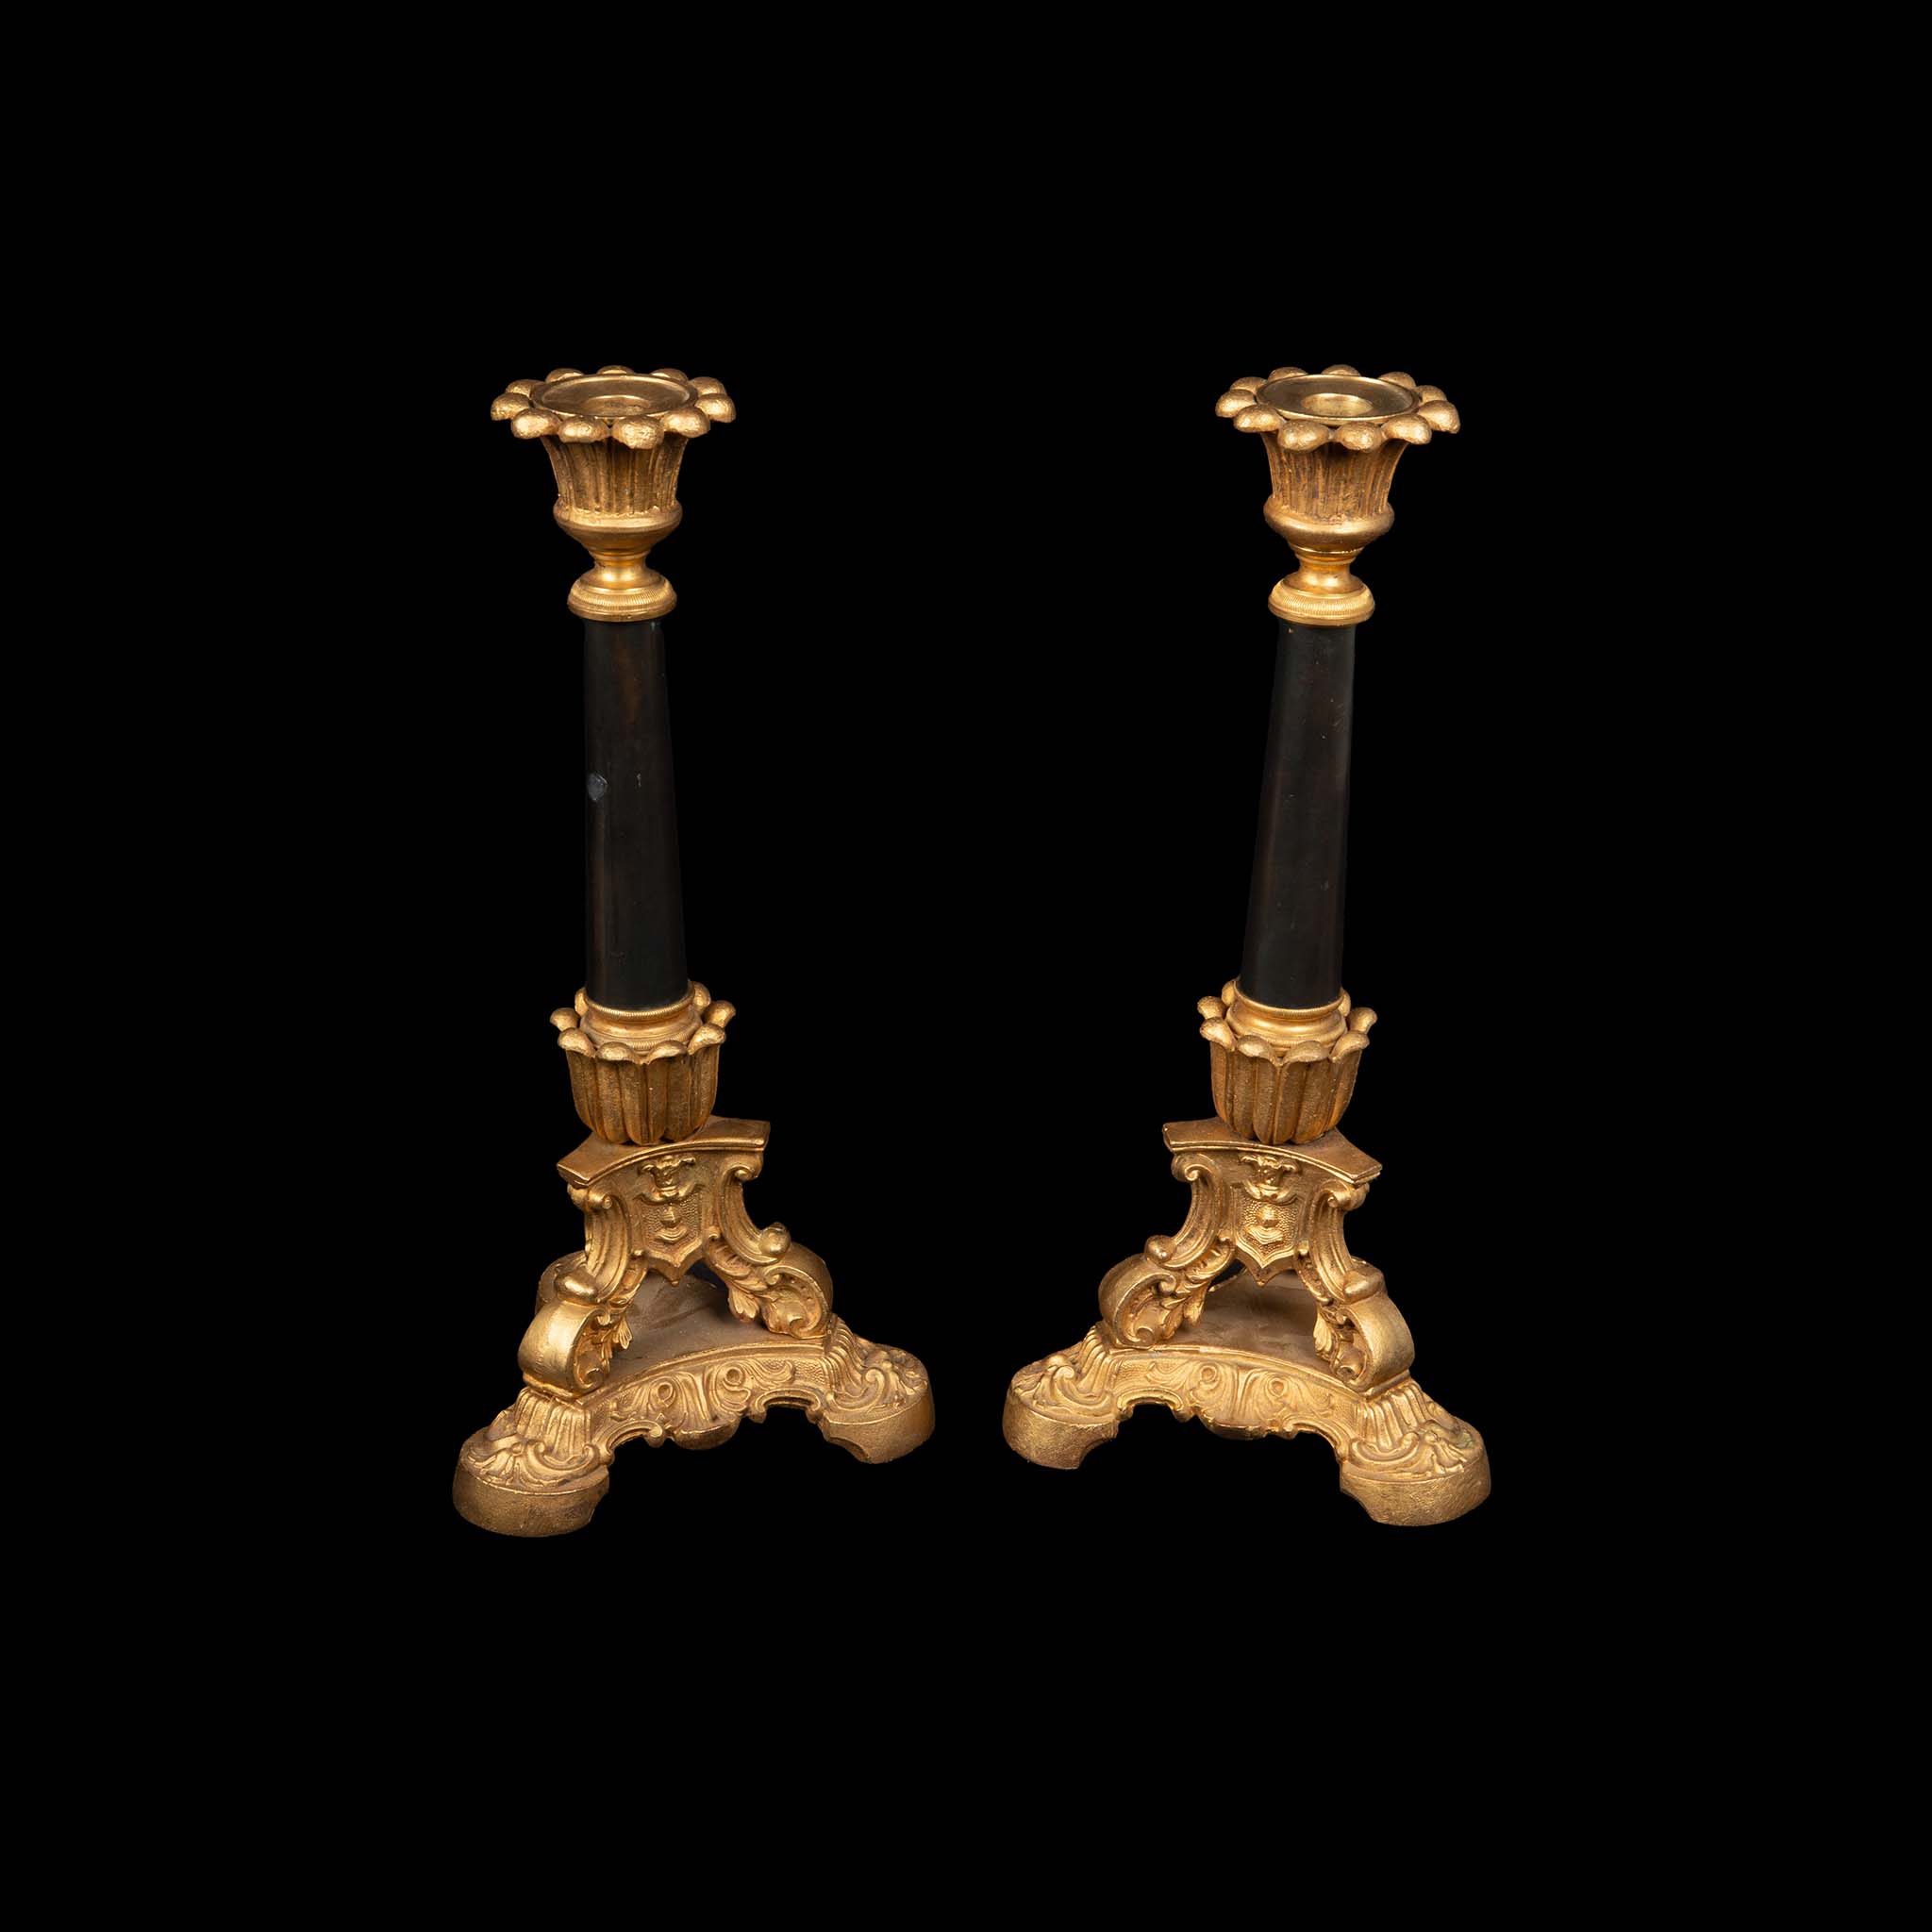 19th Century Gilt and Black Patinated Candle Sticks